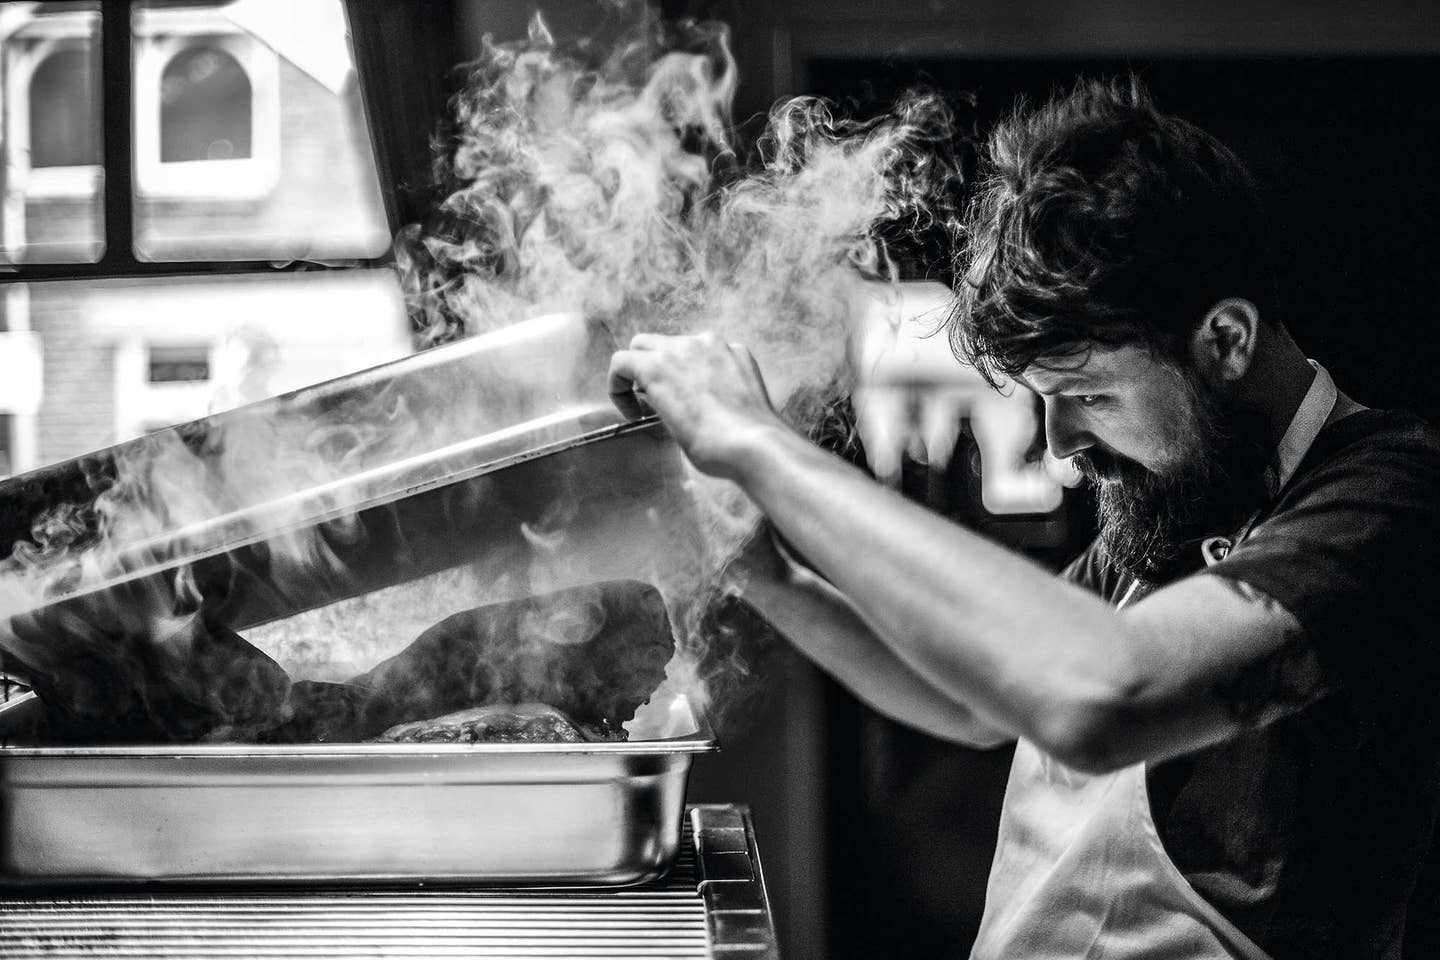 How a Broken Marriage Taught Chef Aaron Turner How to Cook Again